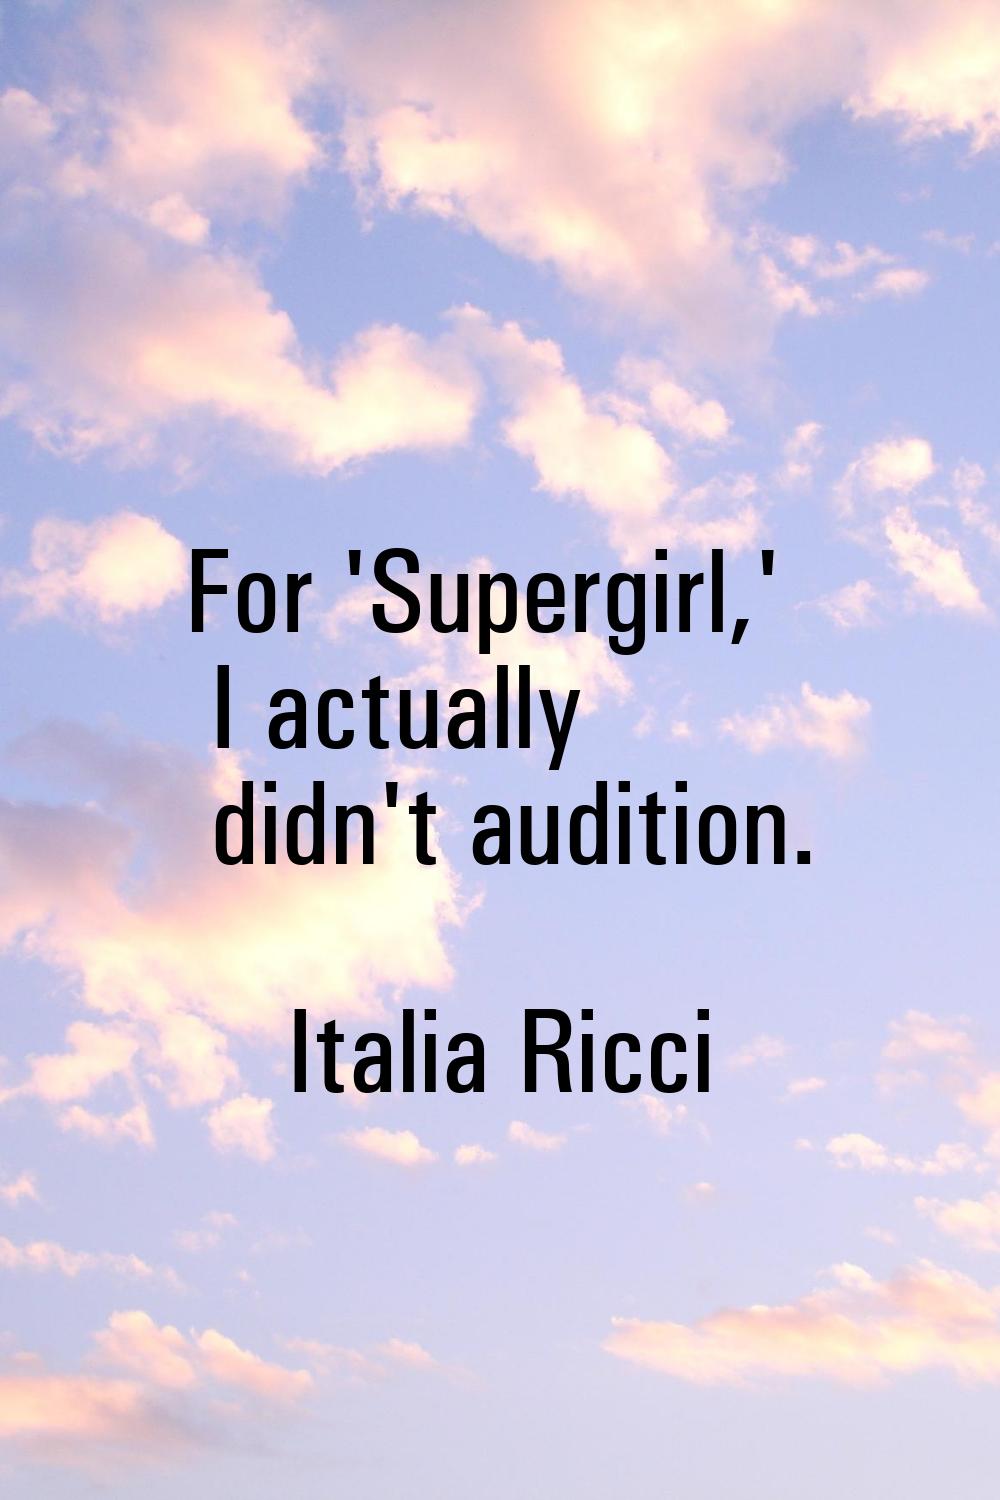 For 'Supergirl,' I actually didn't audition.